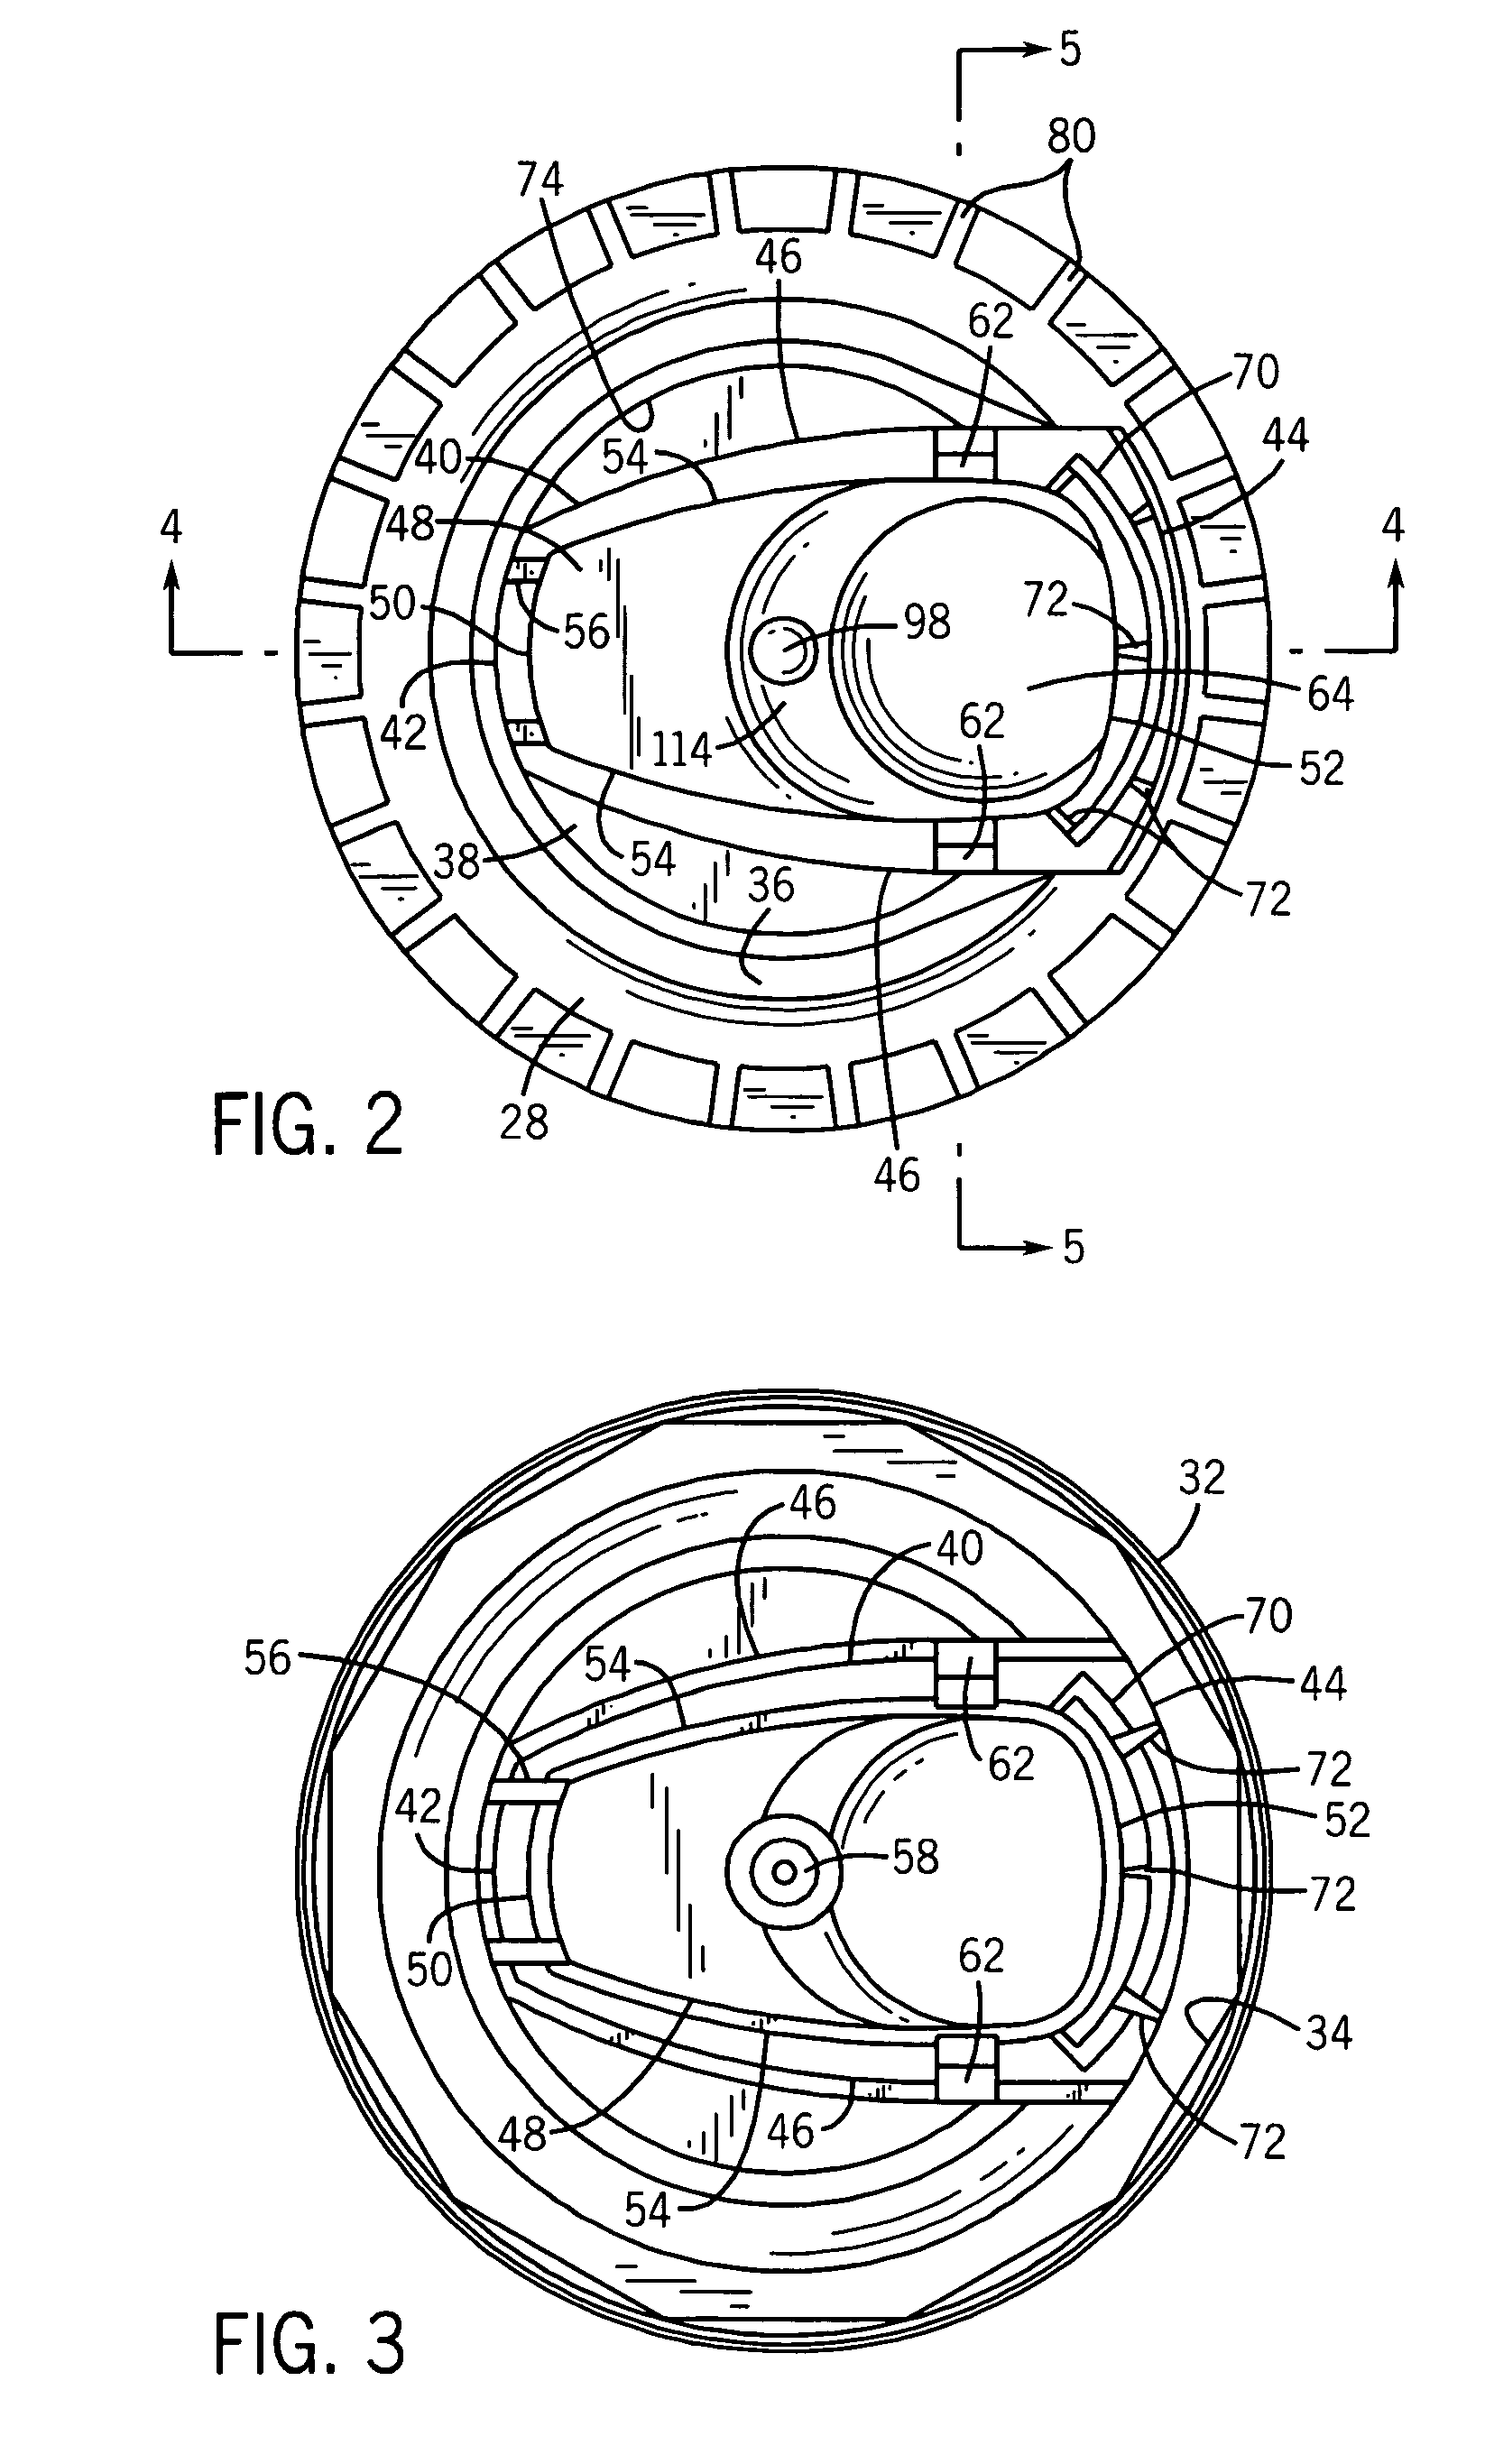 Friction resistant time delay actuator assembly for aerosol containers